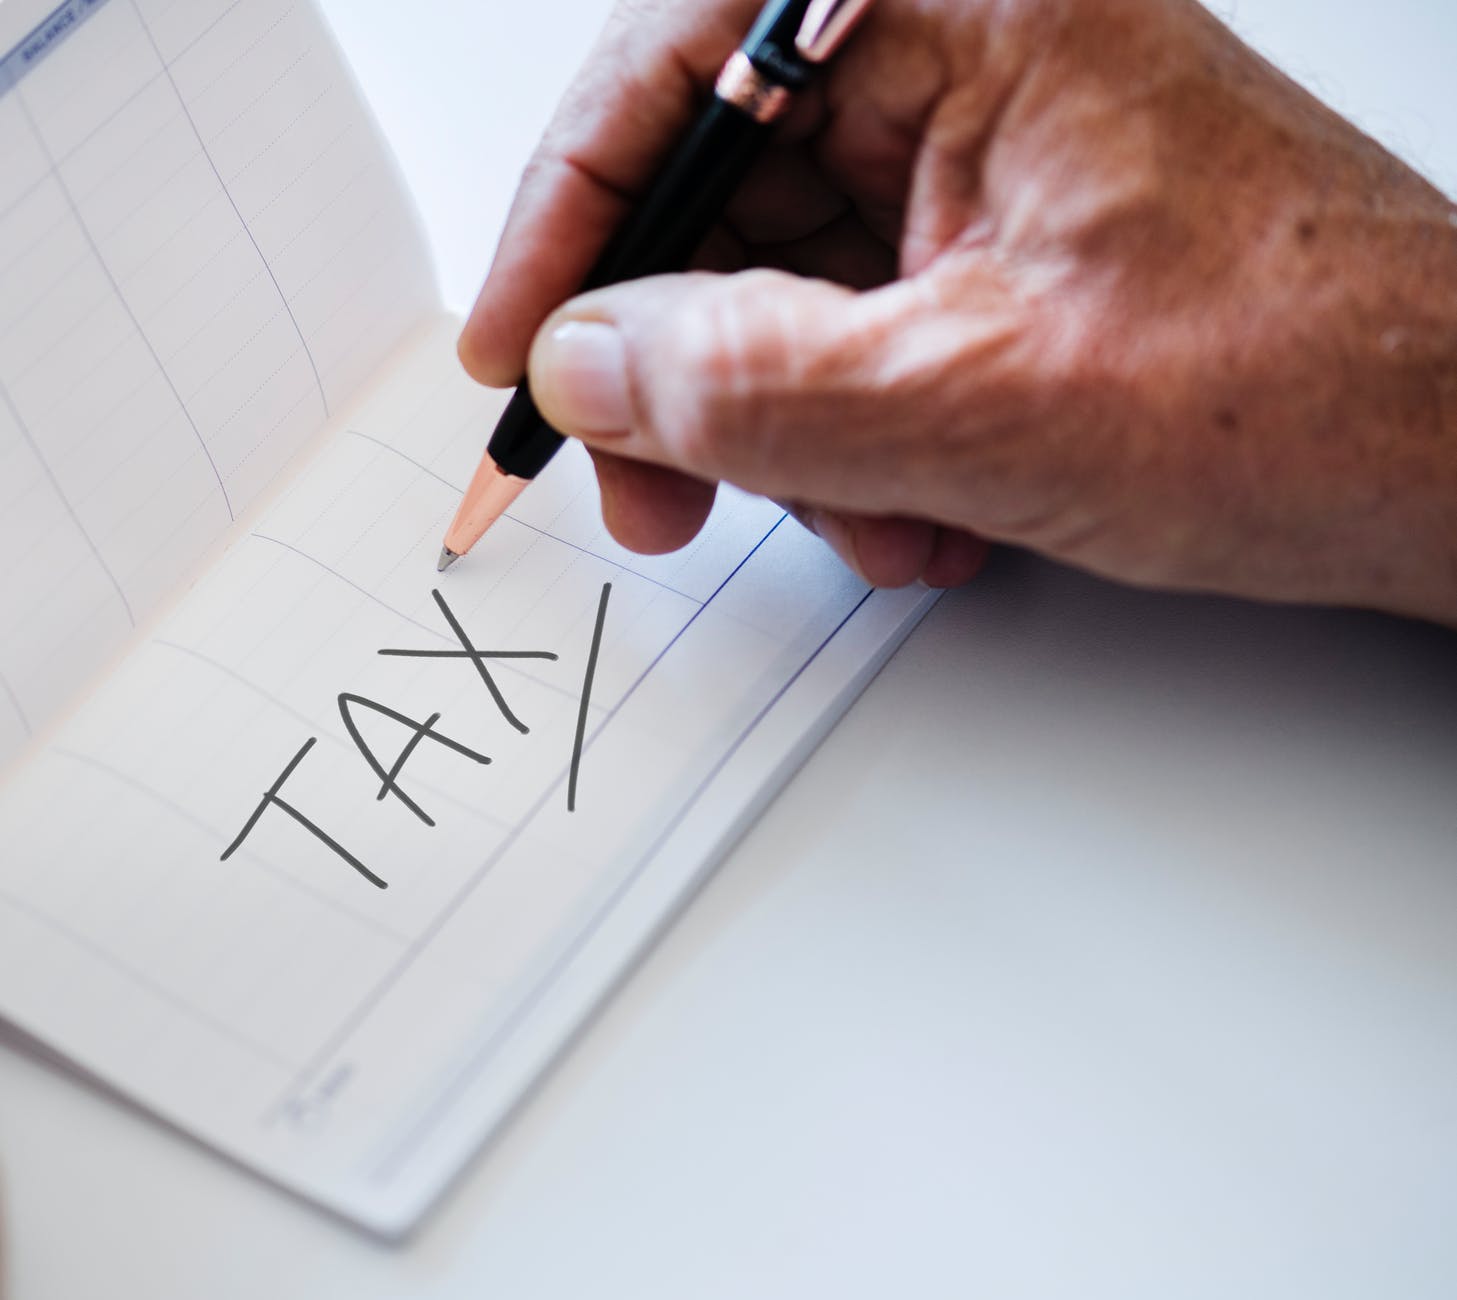 Six Things Your Accountant Really Wishes You Understood at Tax Time - Guest Article from Bryce Welker